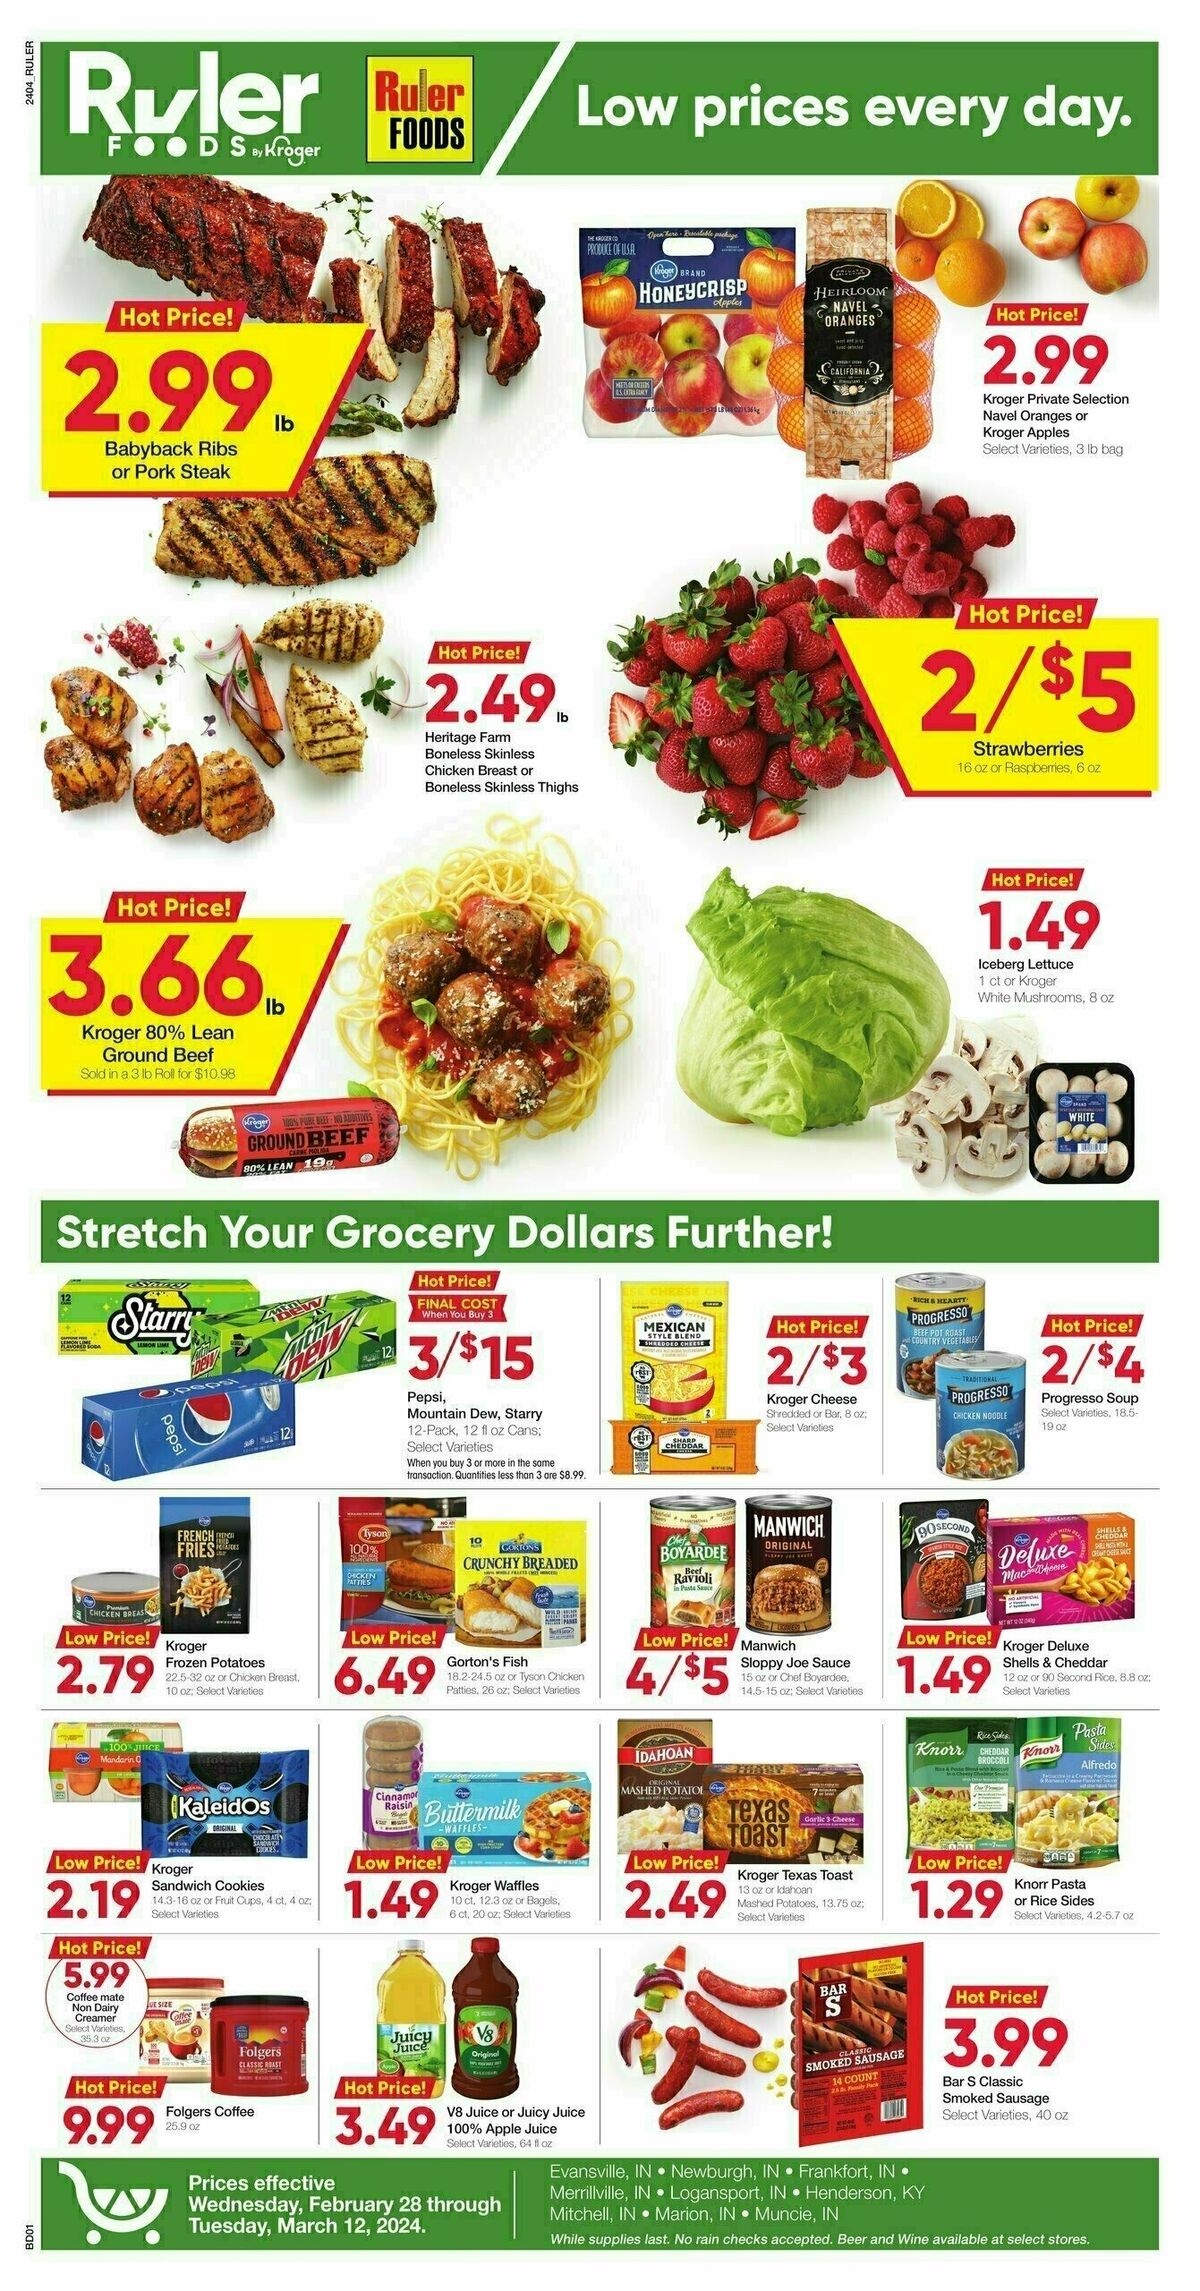 Ruler Foods Weekly Ad from February 28